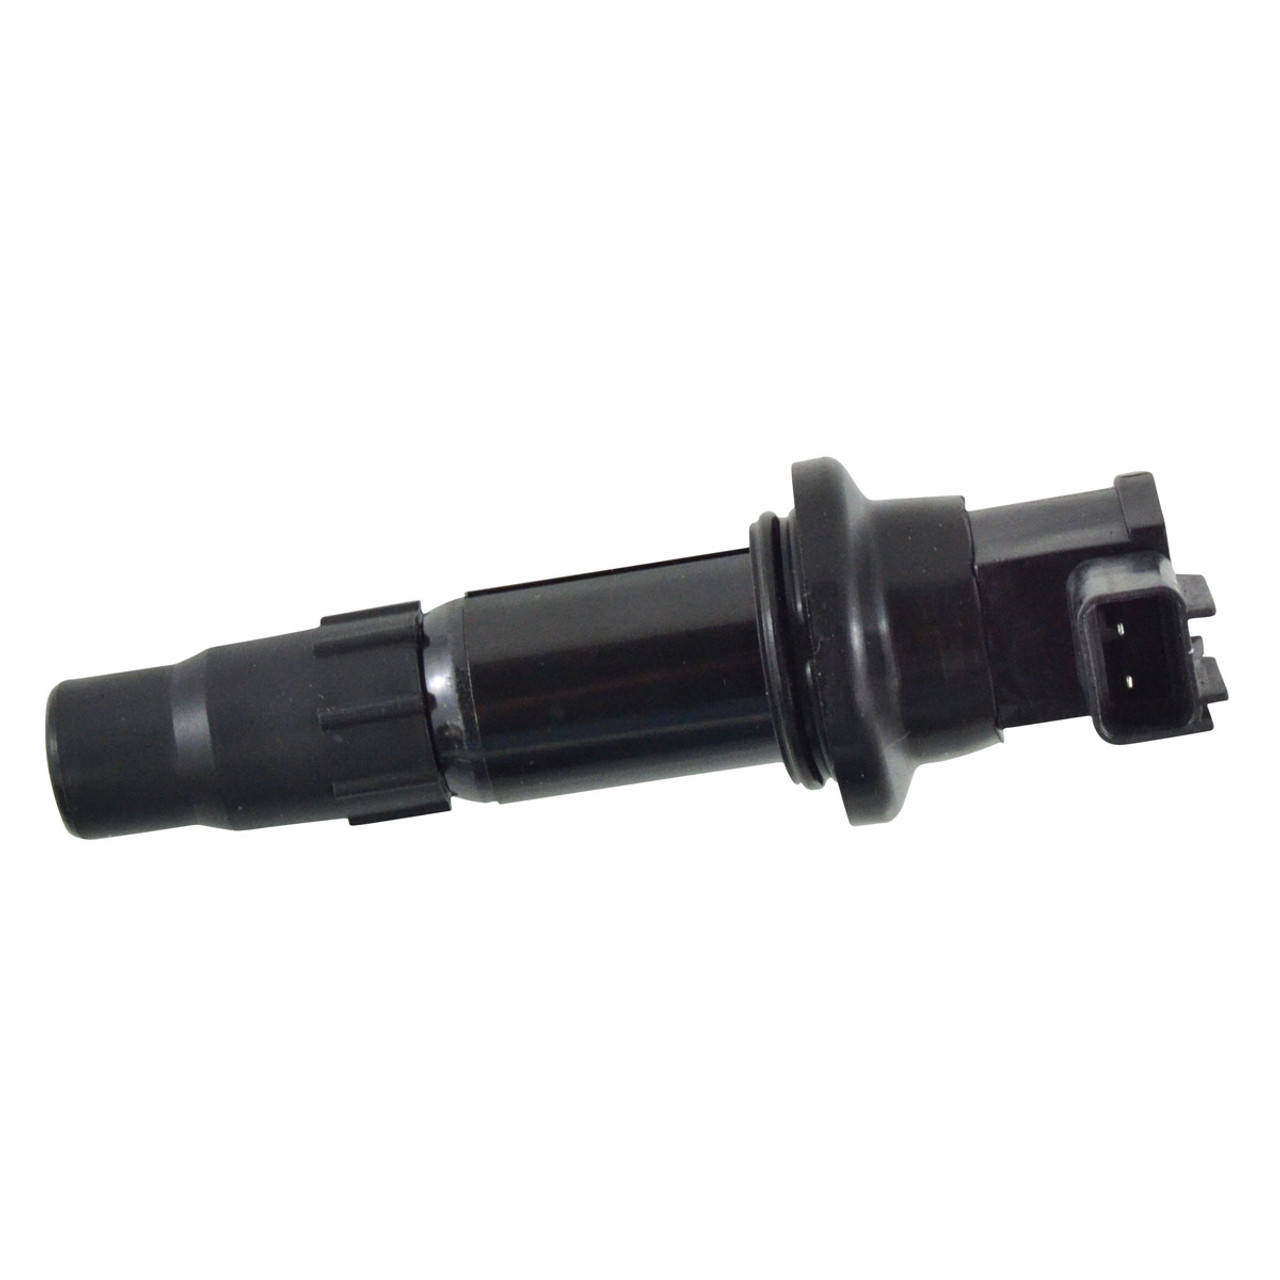 RMSTATOR New Aftermarket Yamaha Ignition Stick Coil, RM06046